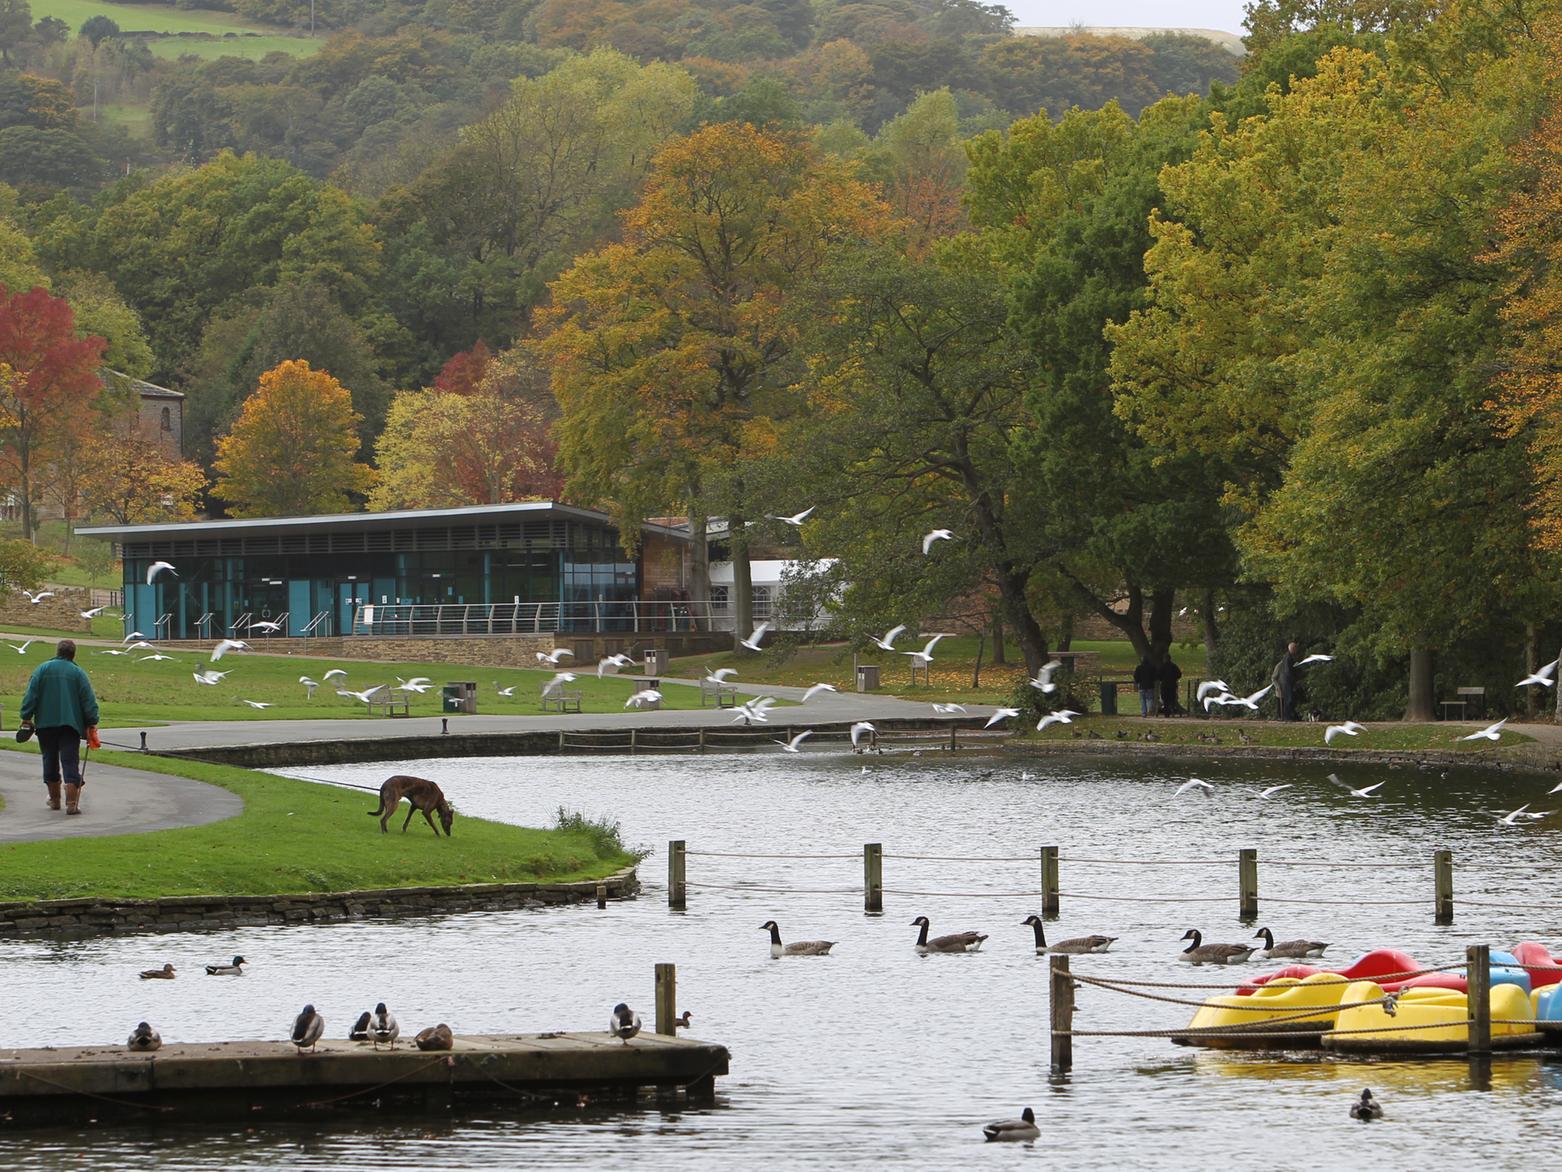 As well as the historic Shibden Hall,  Shibden Park is a popular place to visit. With the chance to take a boat out on the lake have fun in playground or take a stroll through Cunnery Wood theres something for the whole family.